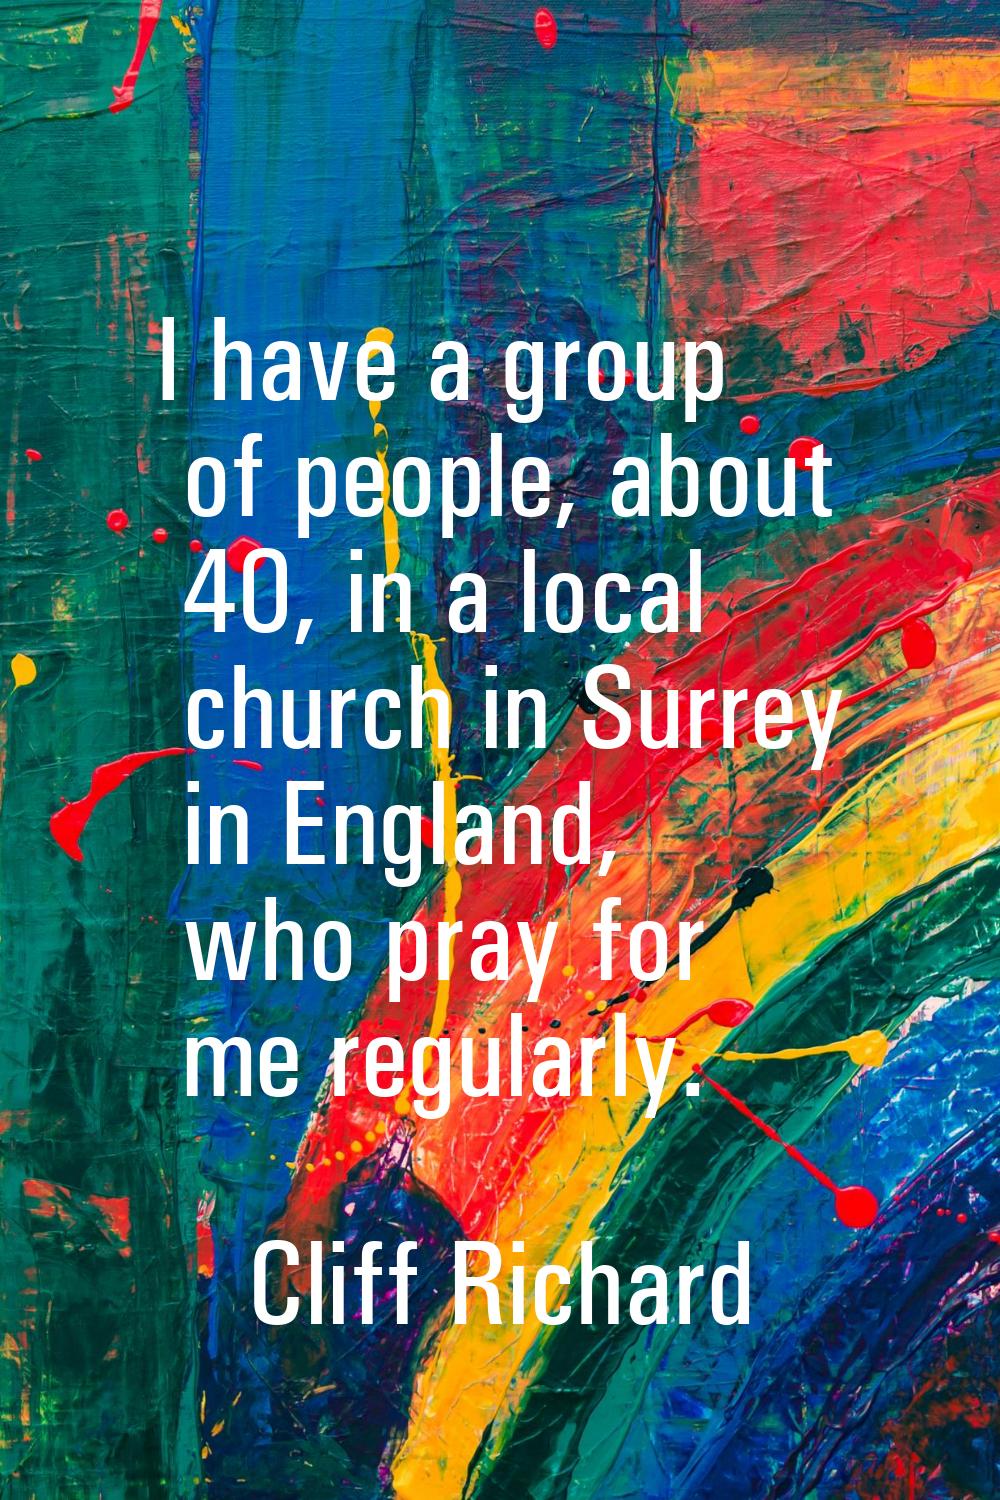 I have a group of people, about 40, in a local church in Surrey in England, who pray for me regular